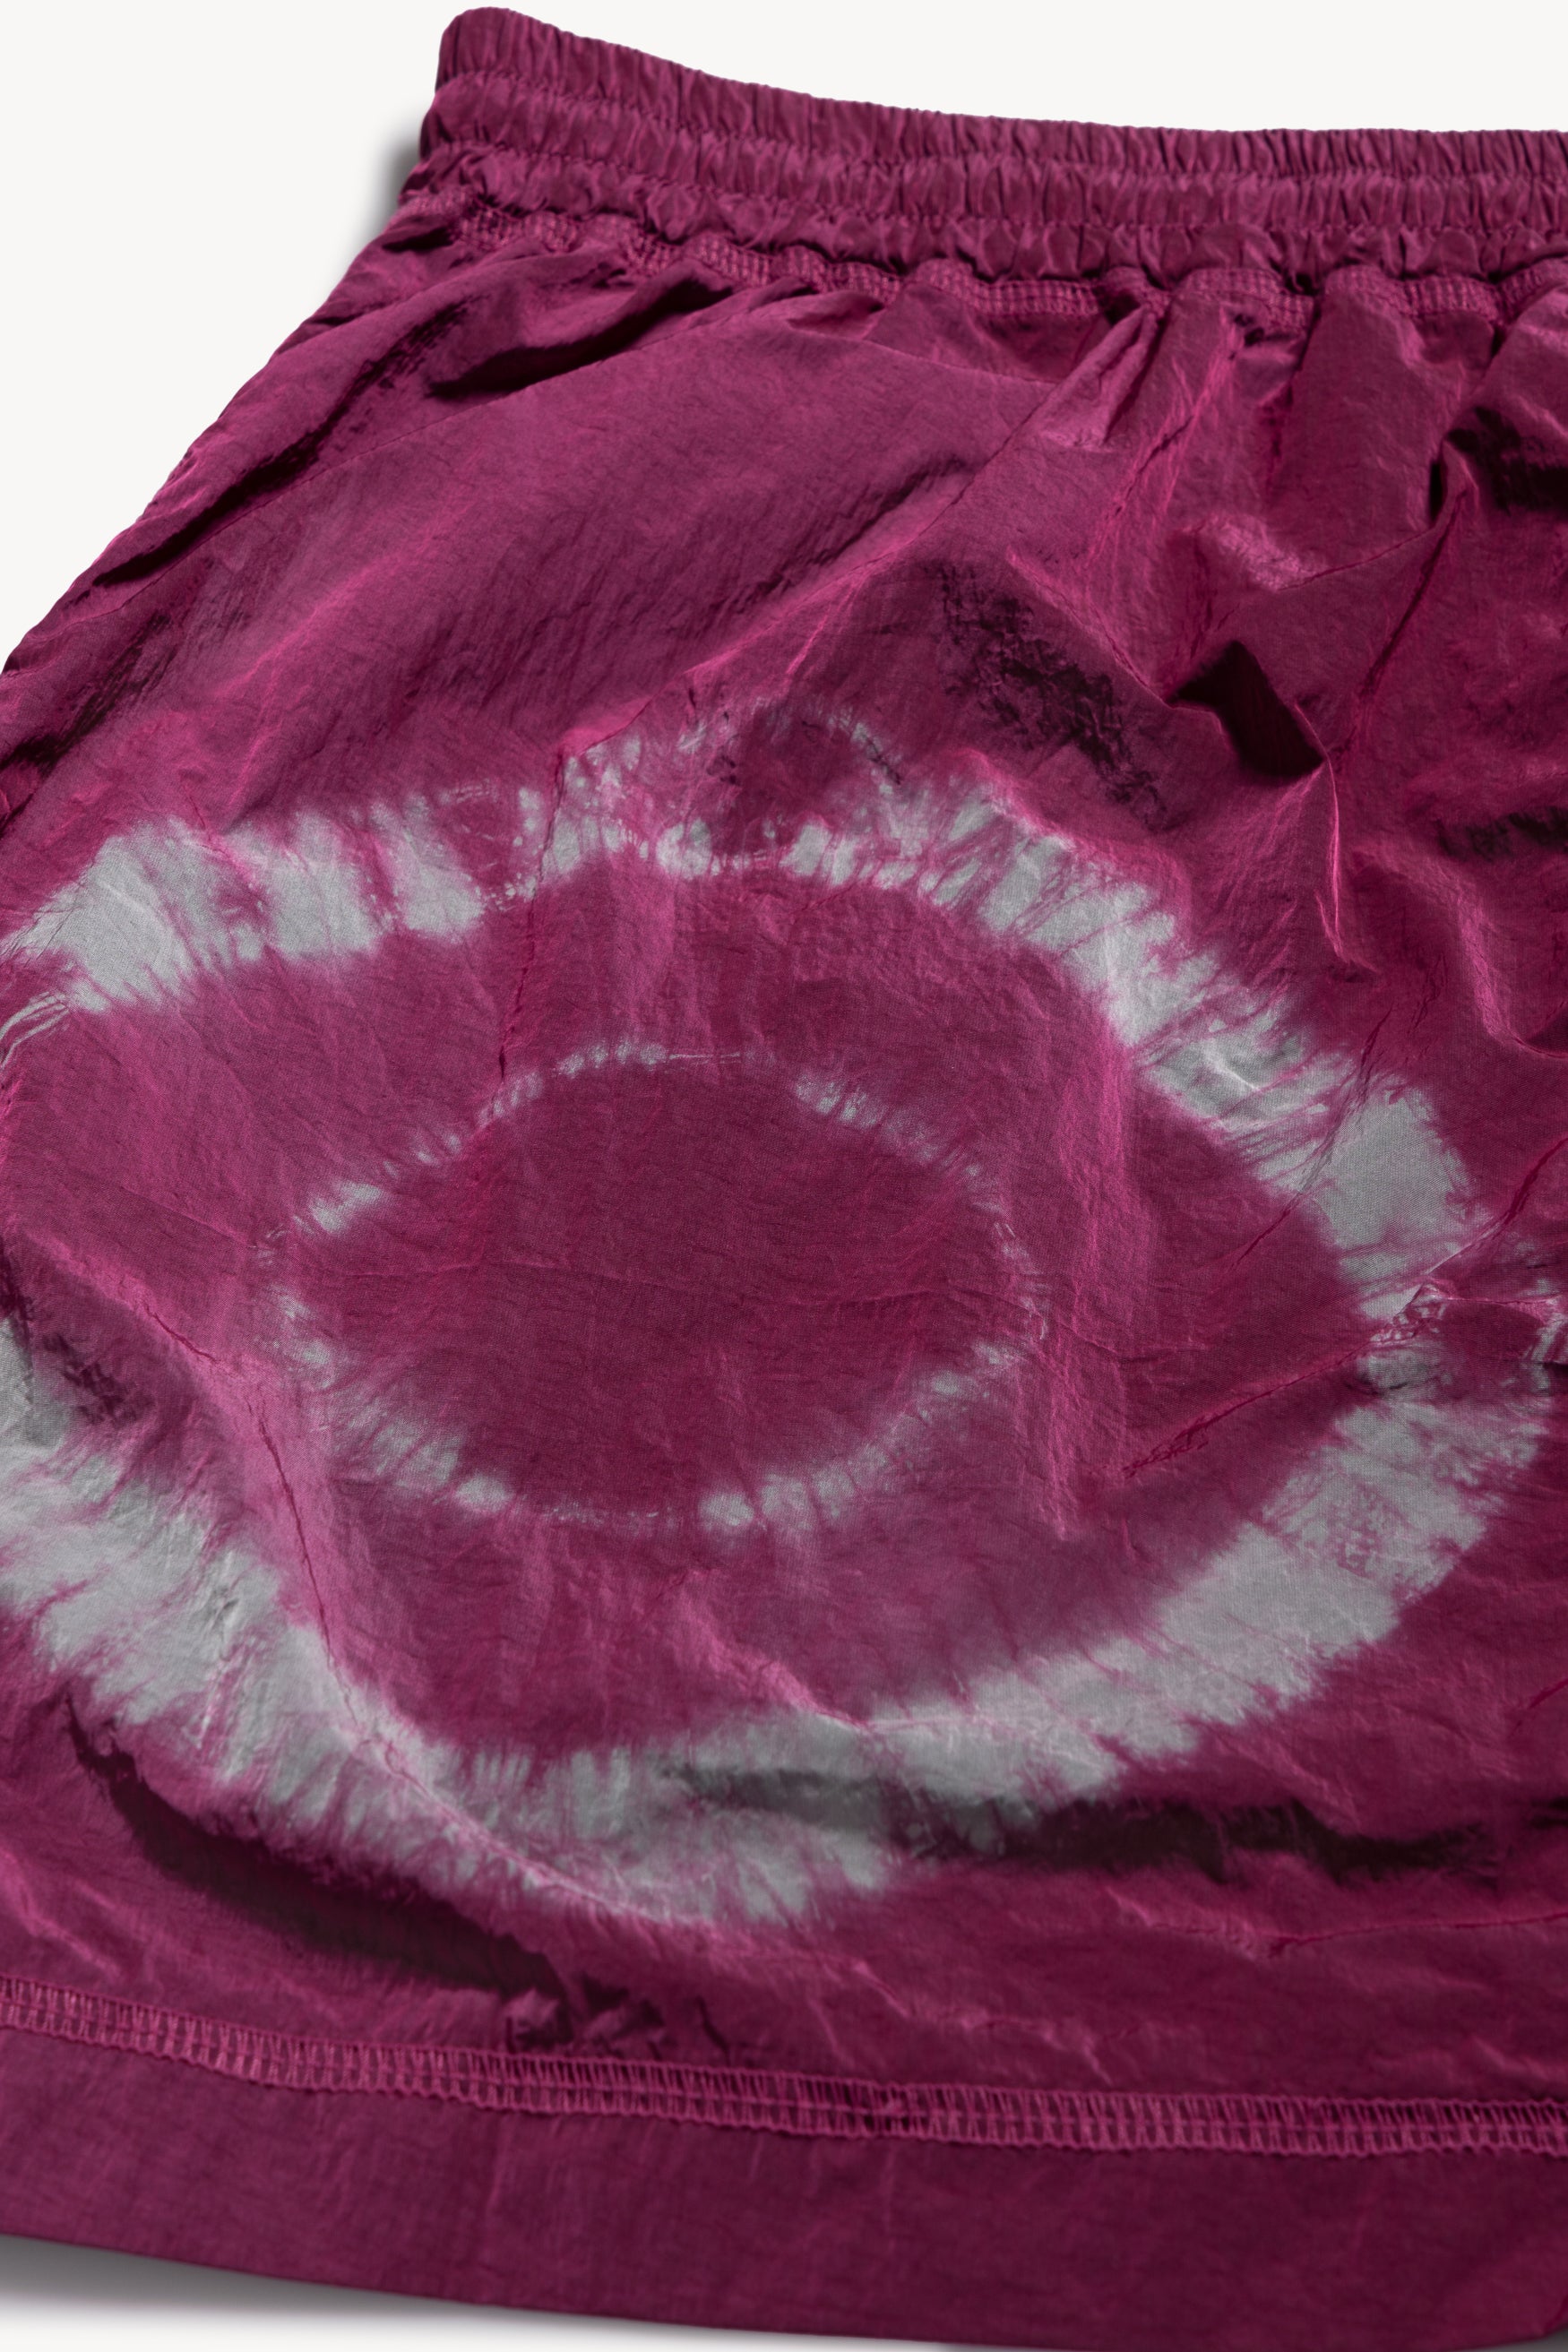 Load image into Gallery viewer, Tie-Dye Windcheater Shorts